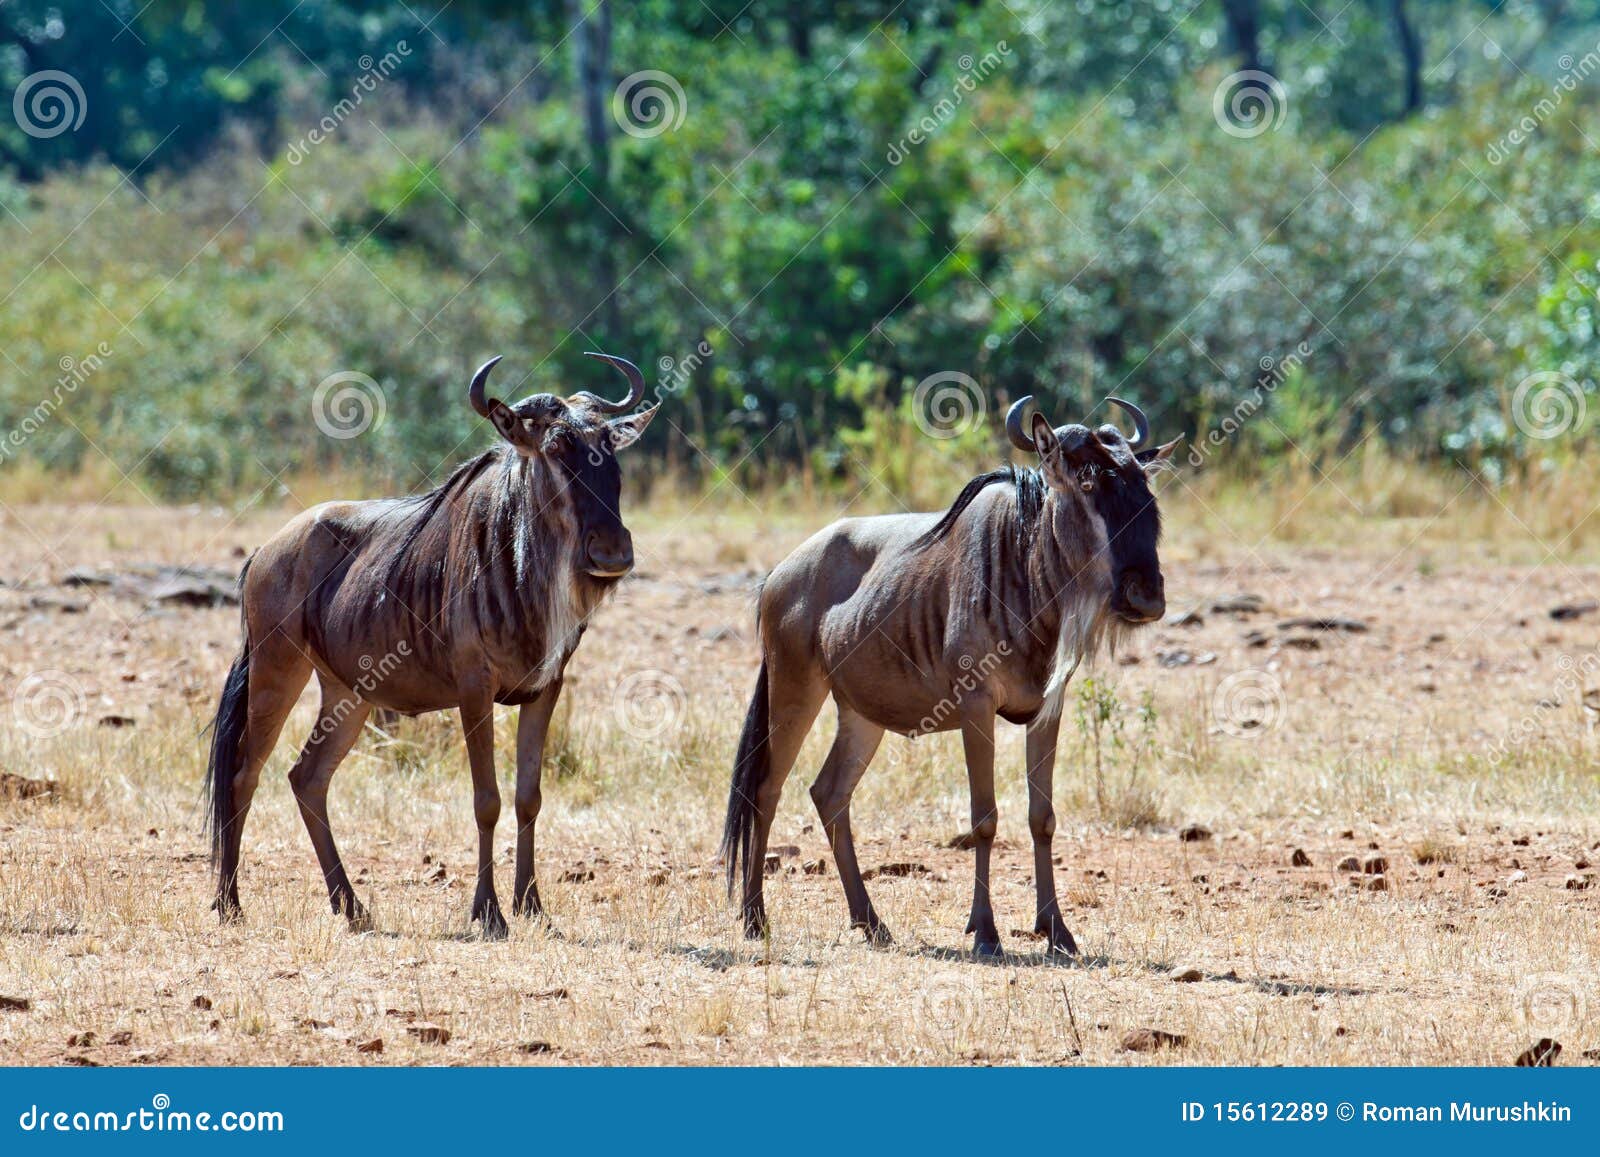 two wildebeests are in the savannah